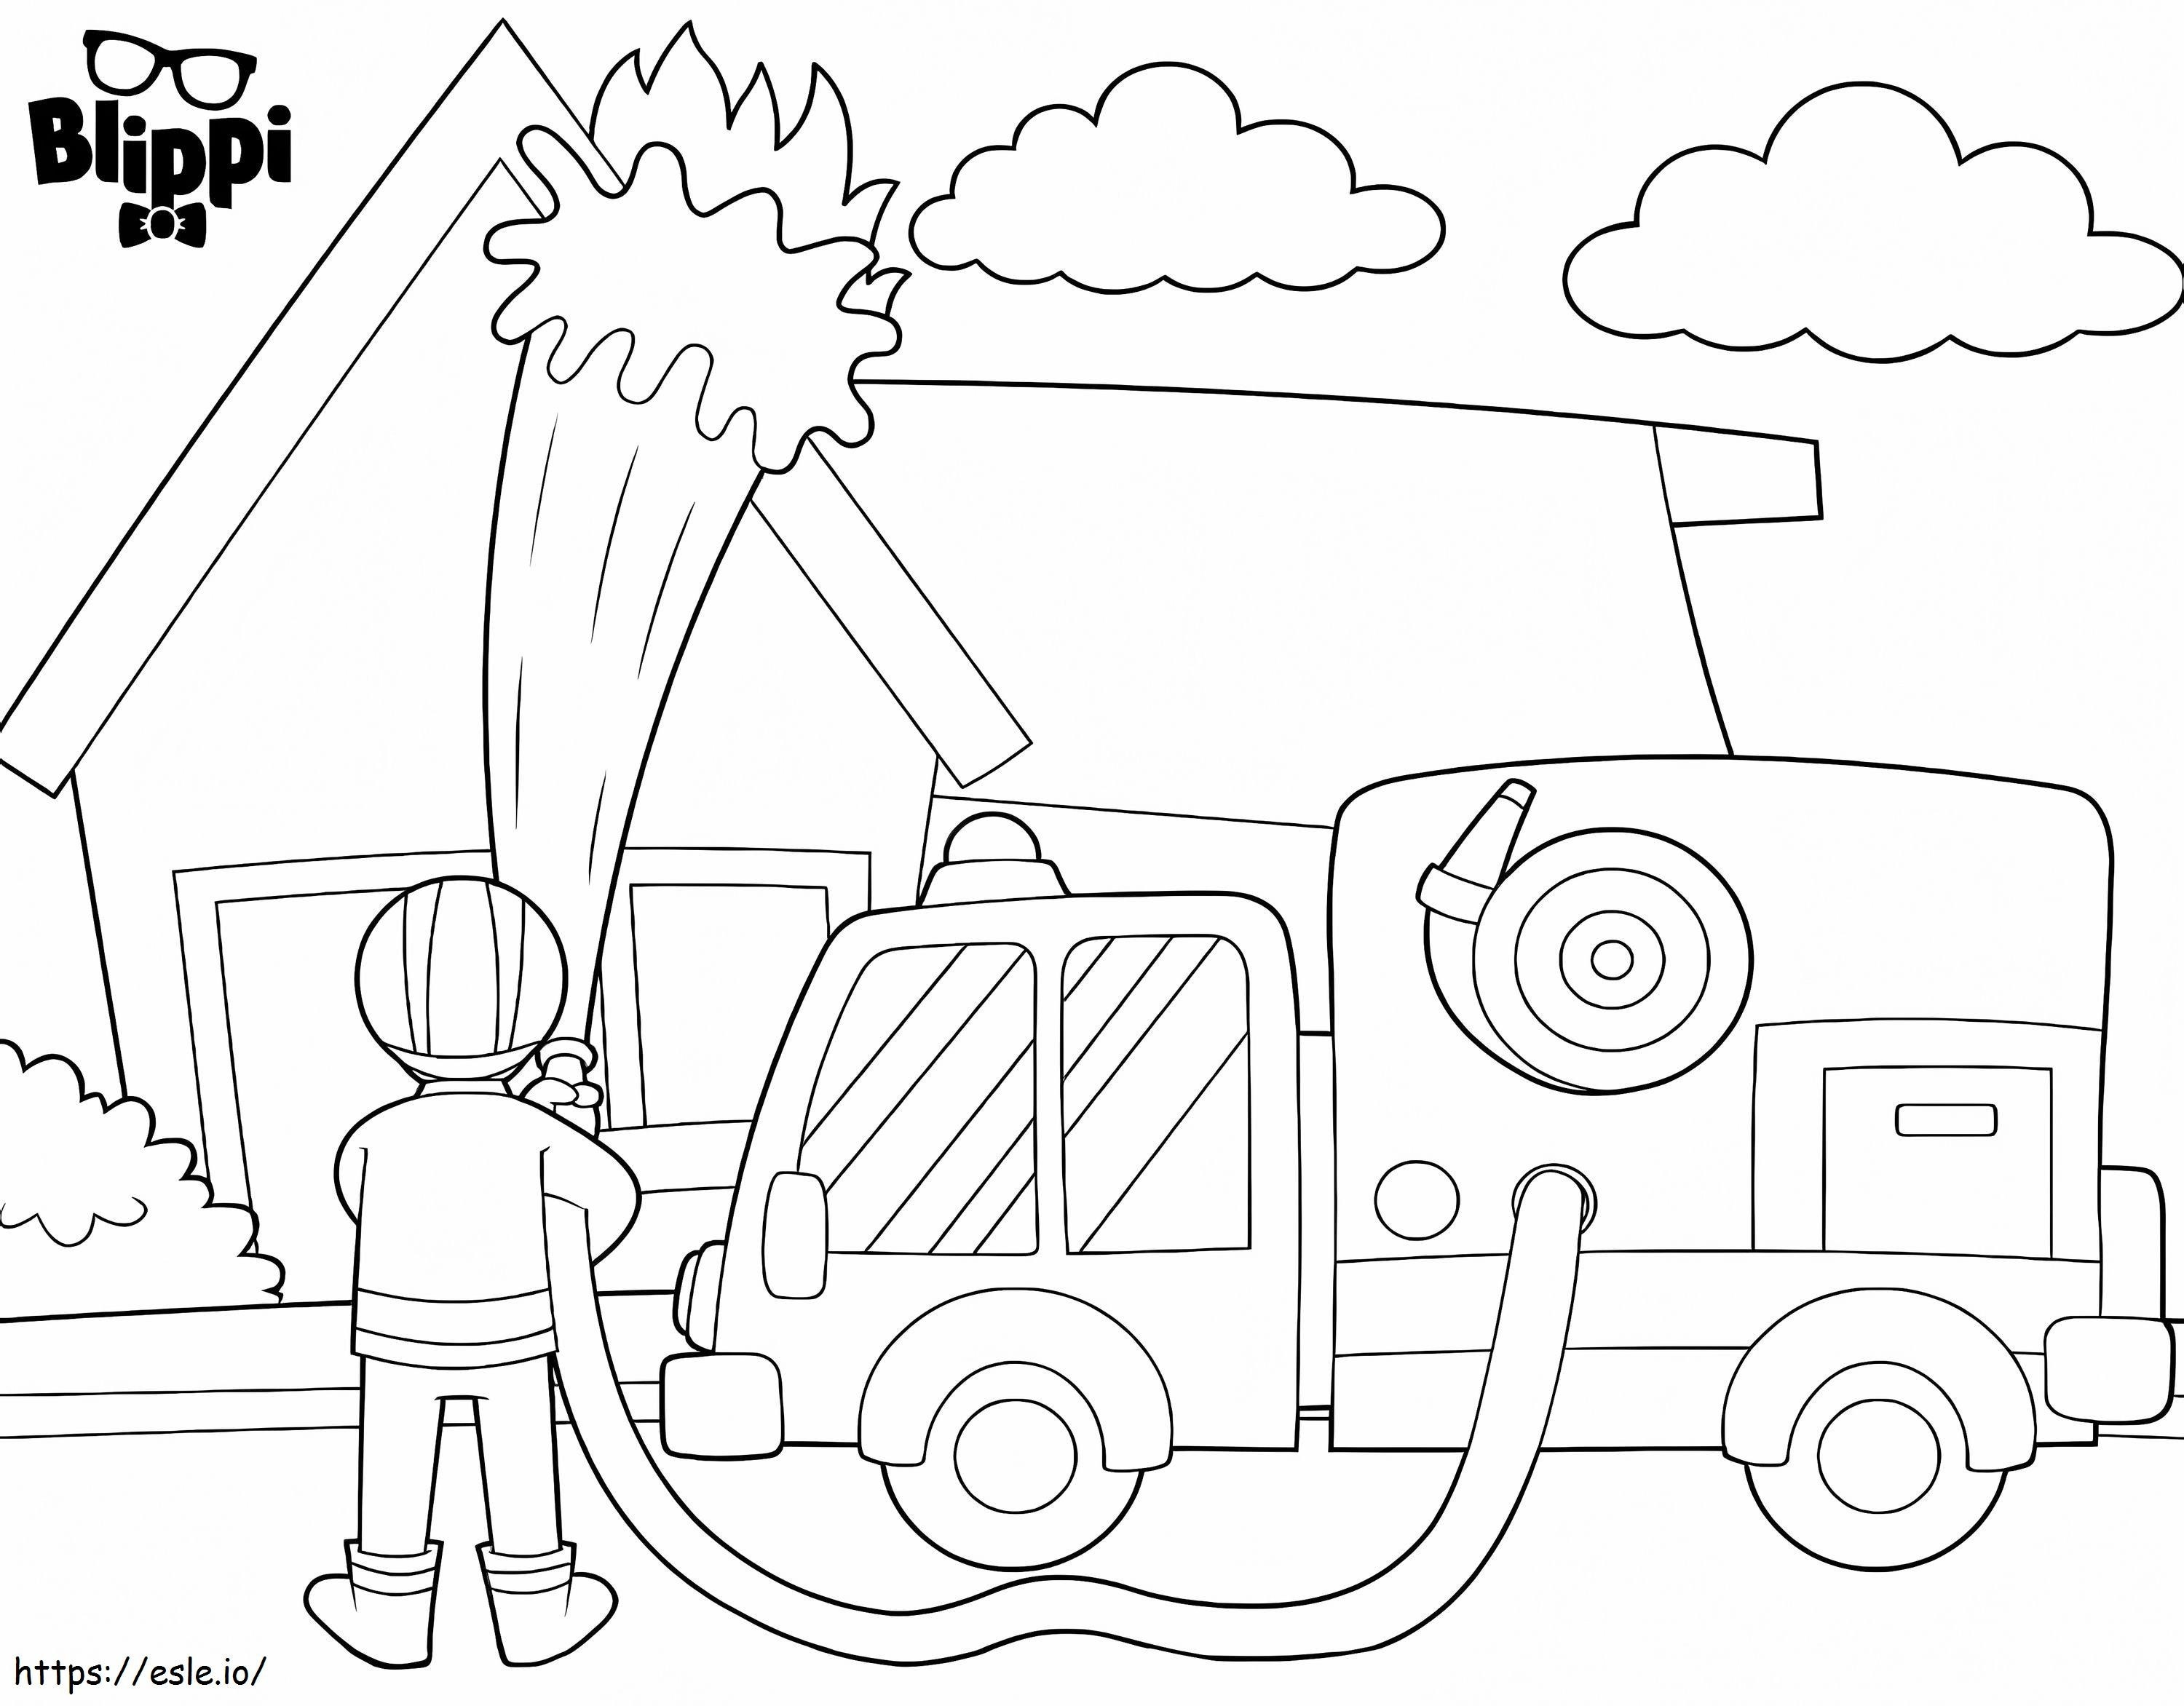 Fireman Blippi coloring page